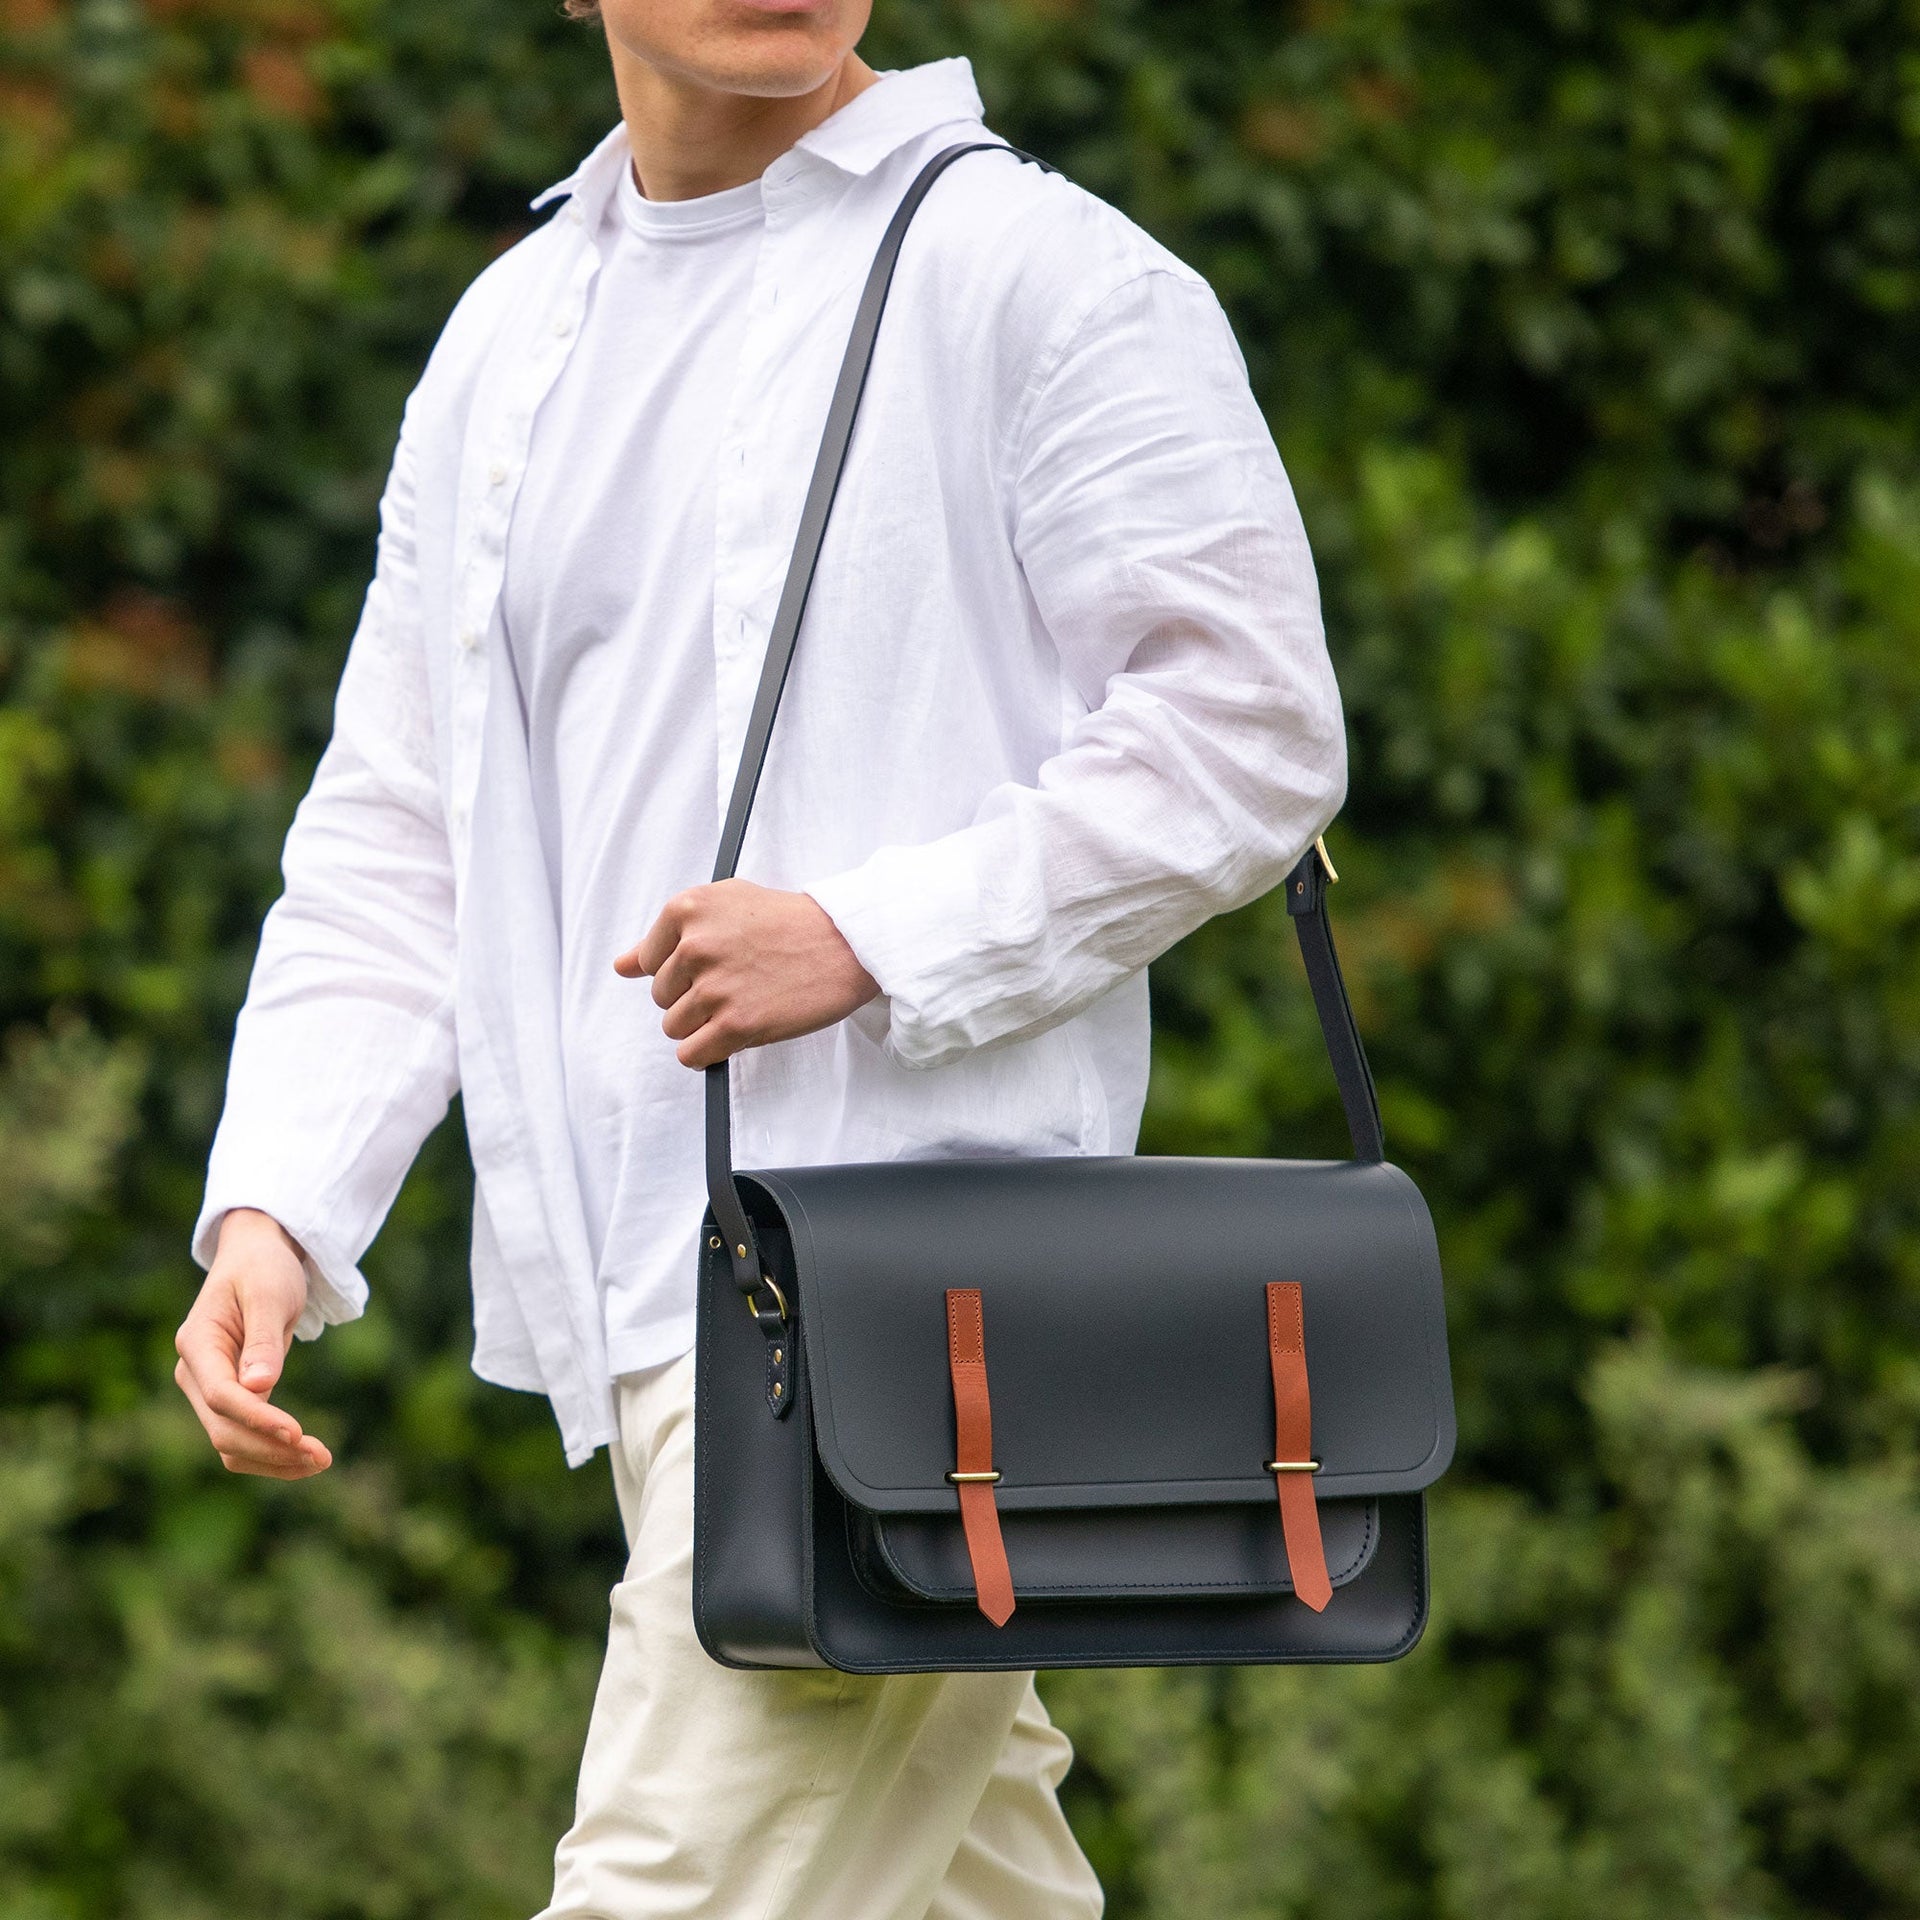 Gifts for Friends: Thoughtful and Stylish Presents to Celebrate a Special Bond - The Cambridge Satchel Company EU Store